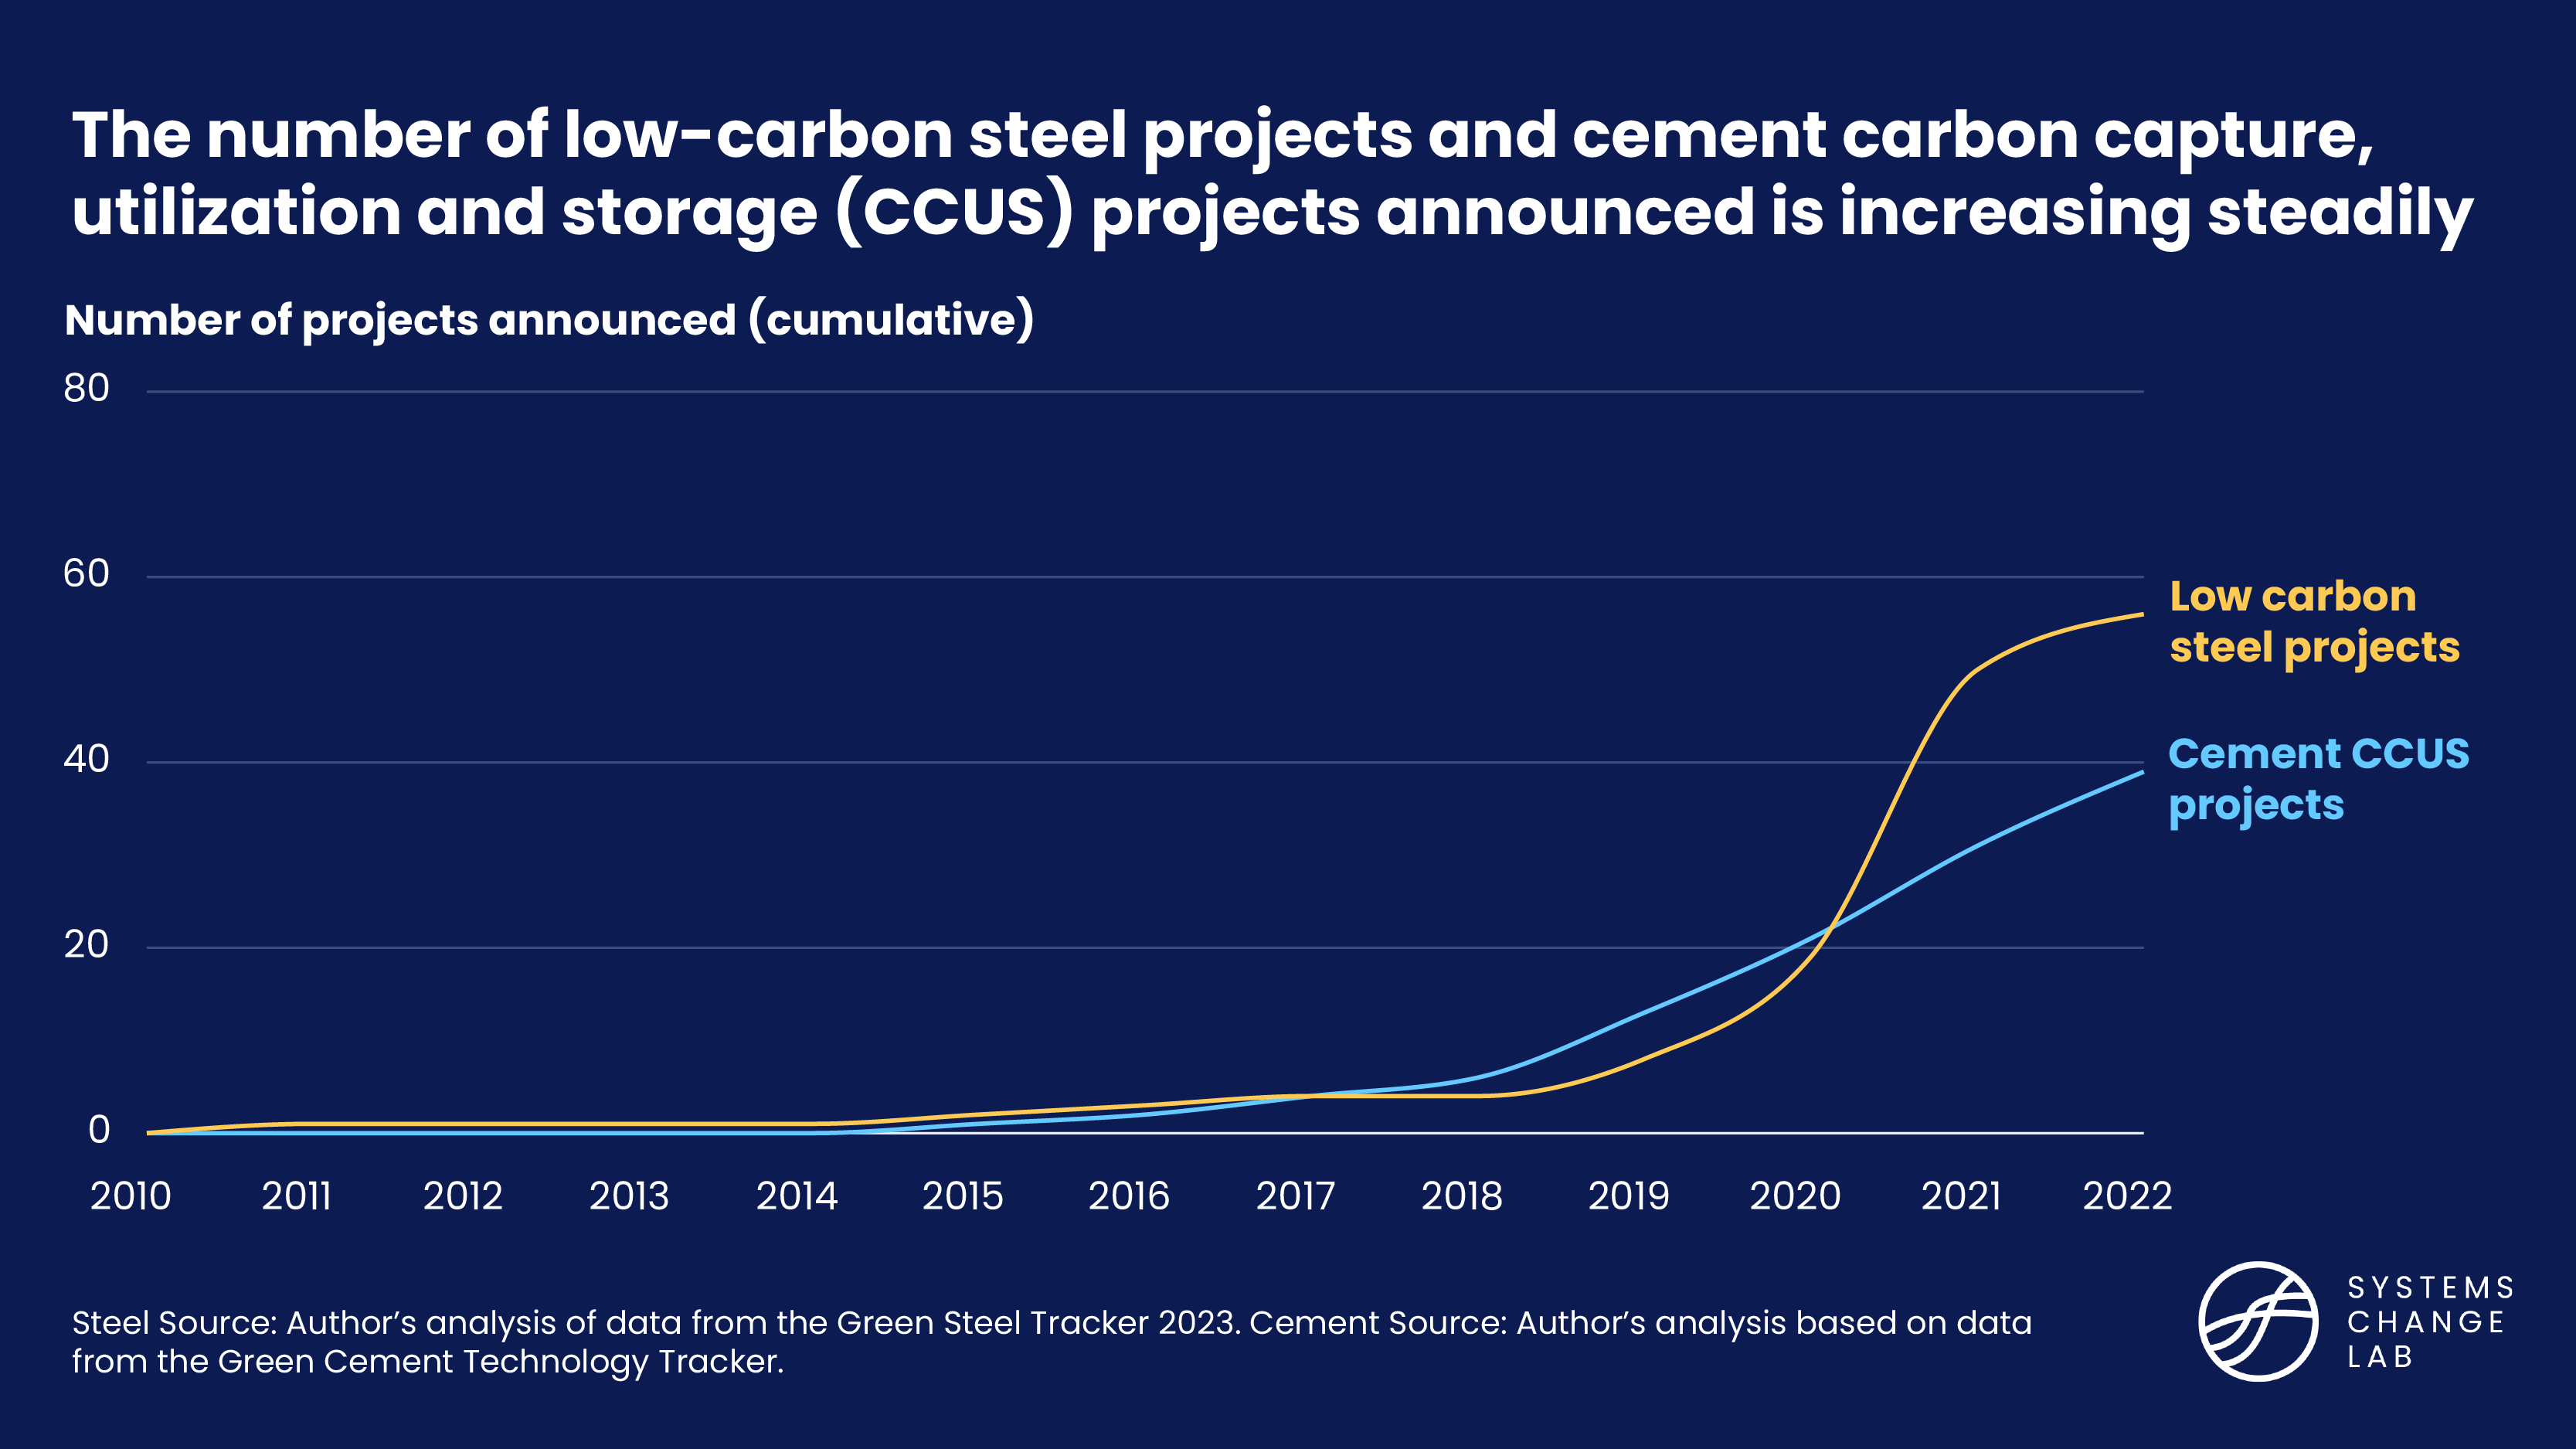 The number of low-carbon steel projects and cement carbon capture, utilization and storage (CCUS) projects announced is increasing steadily